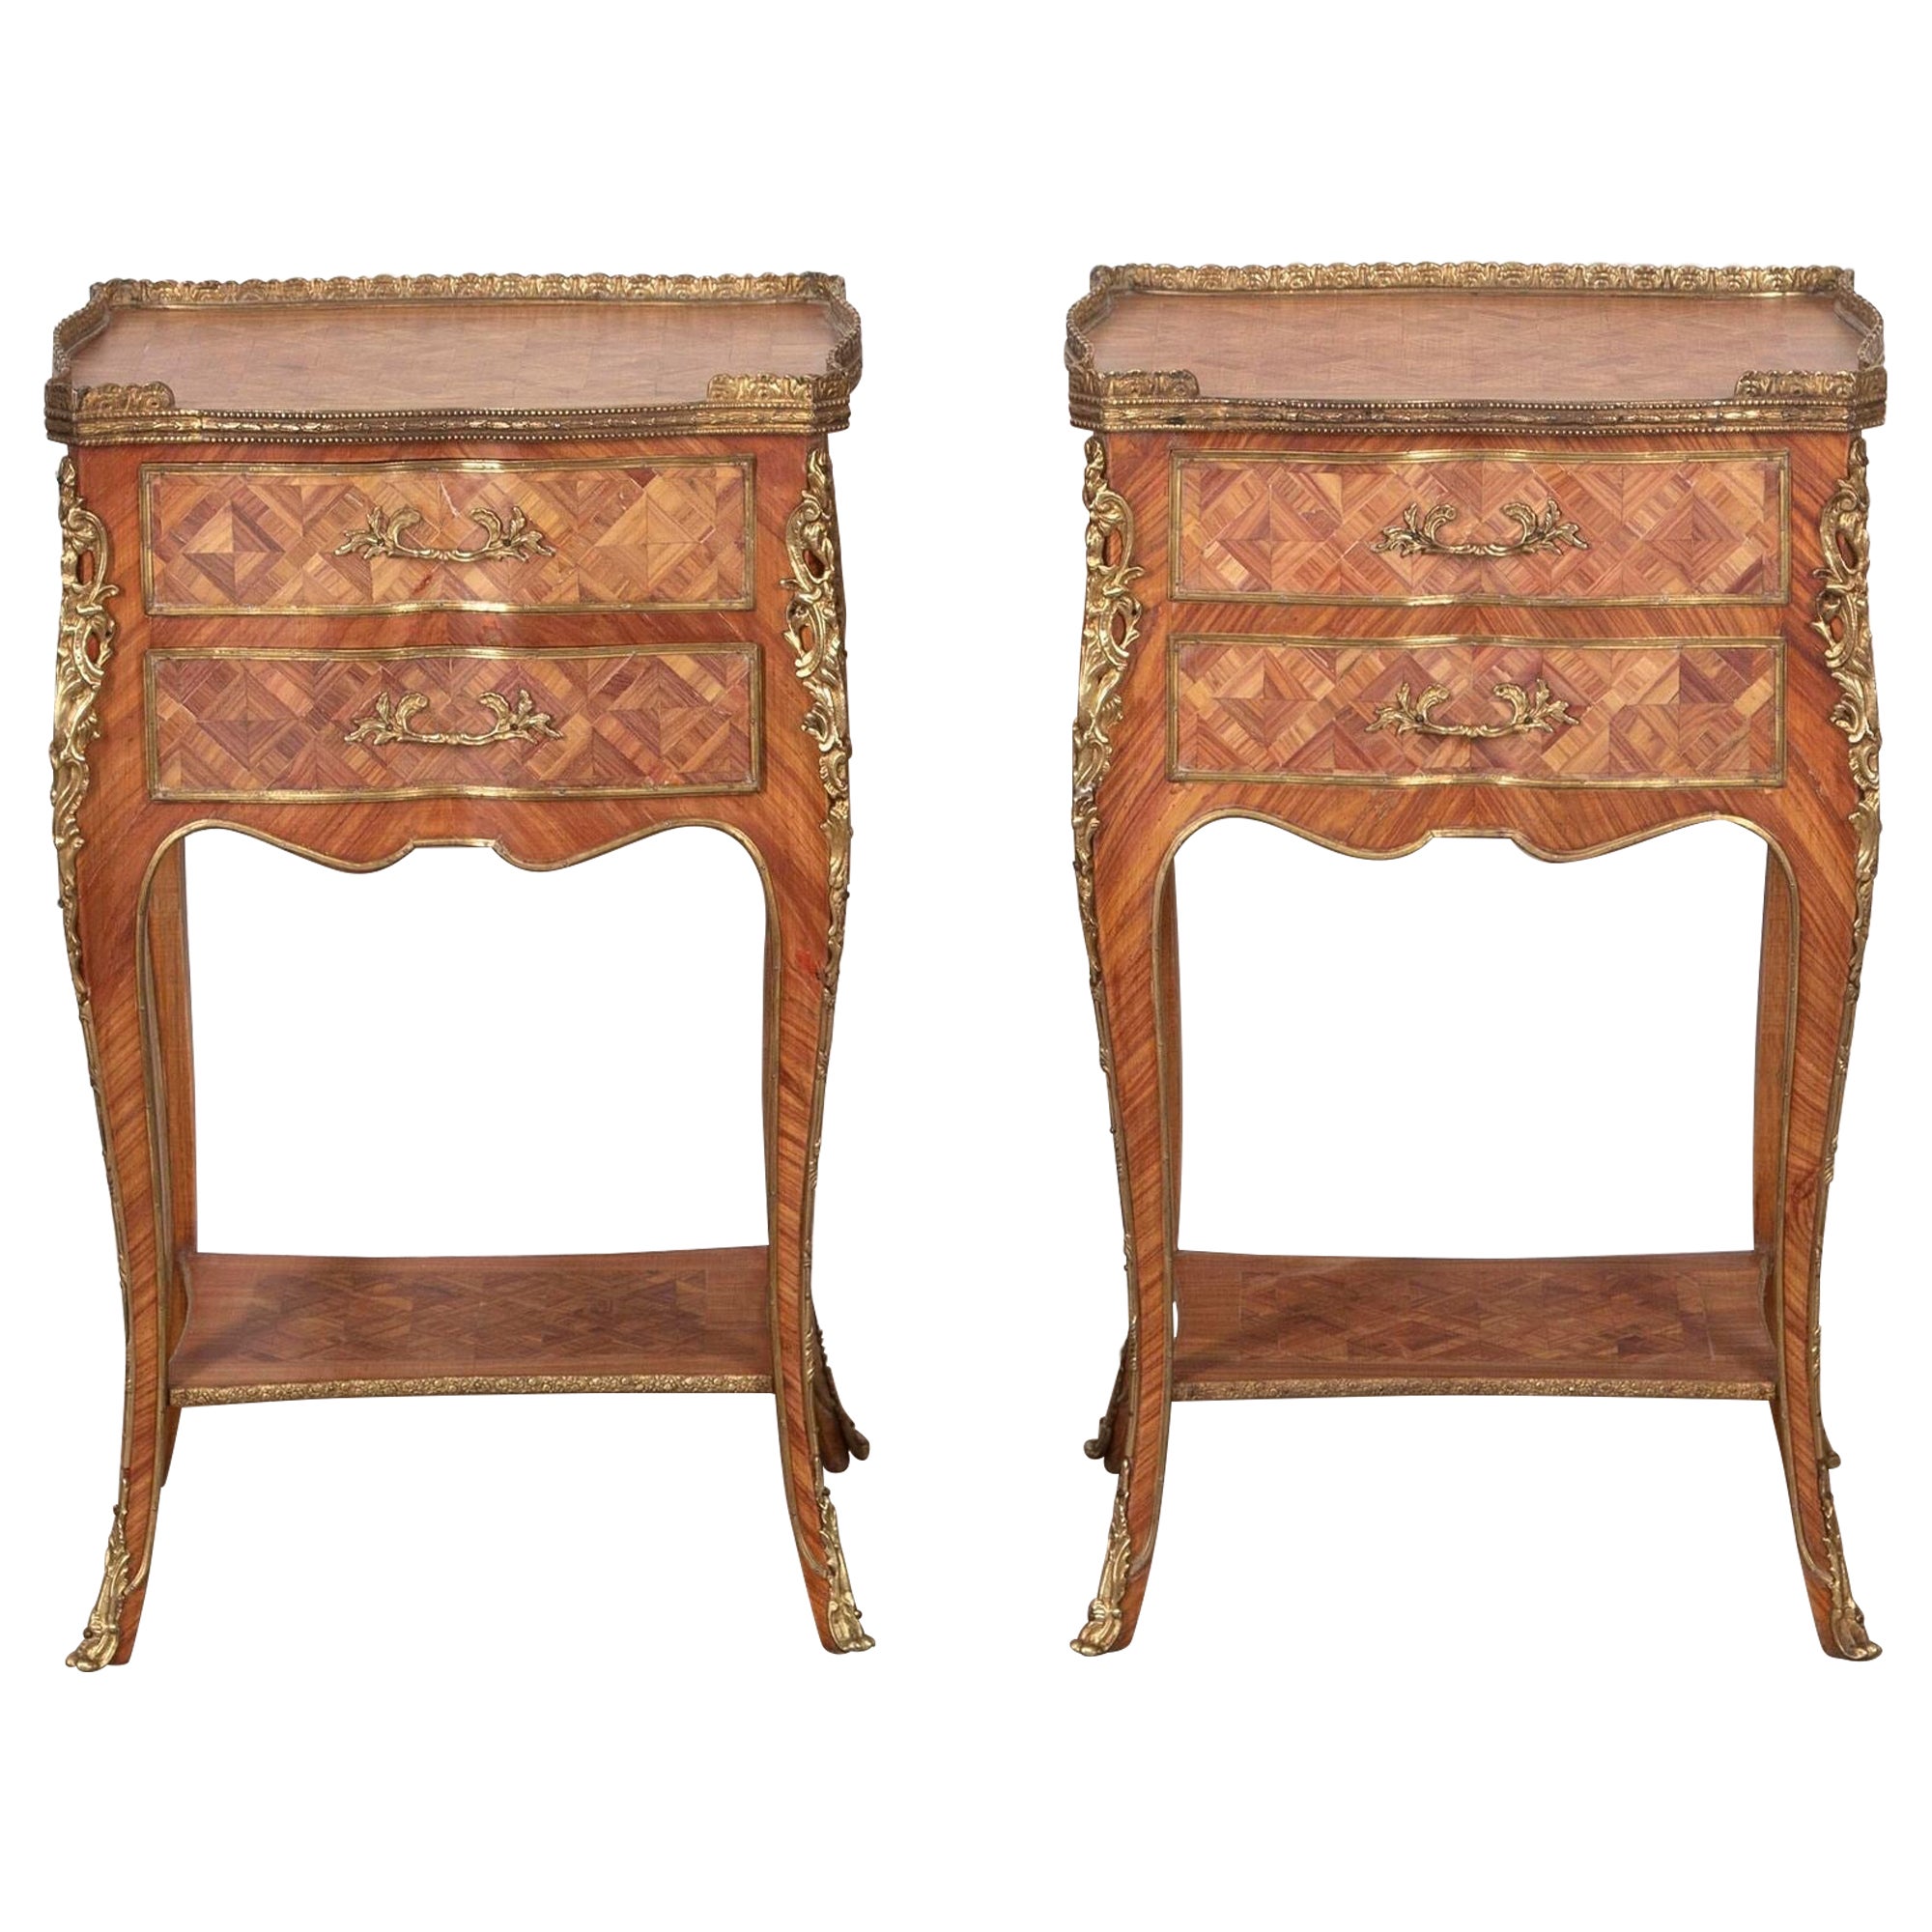 Pair of Italian Marquetry Bedside Tables